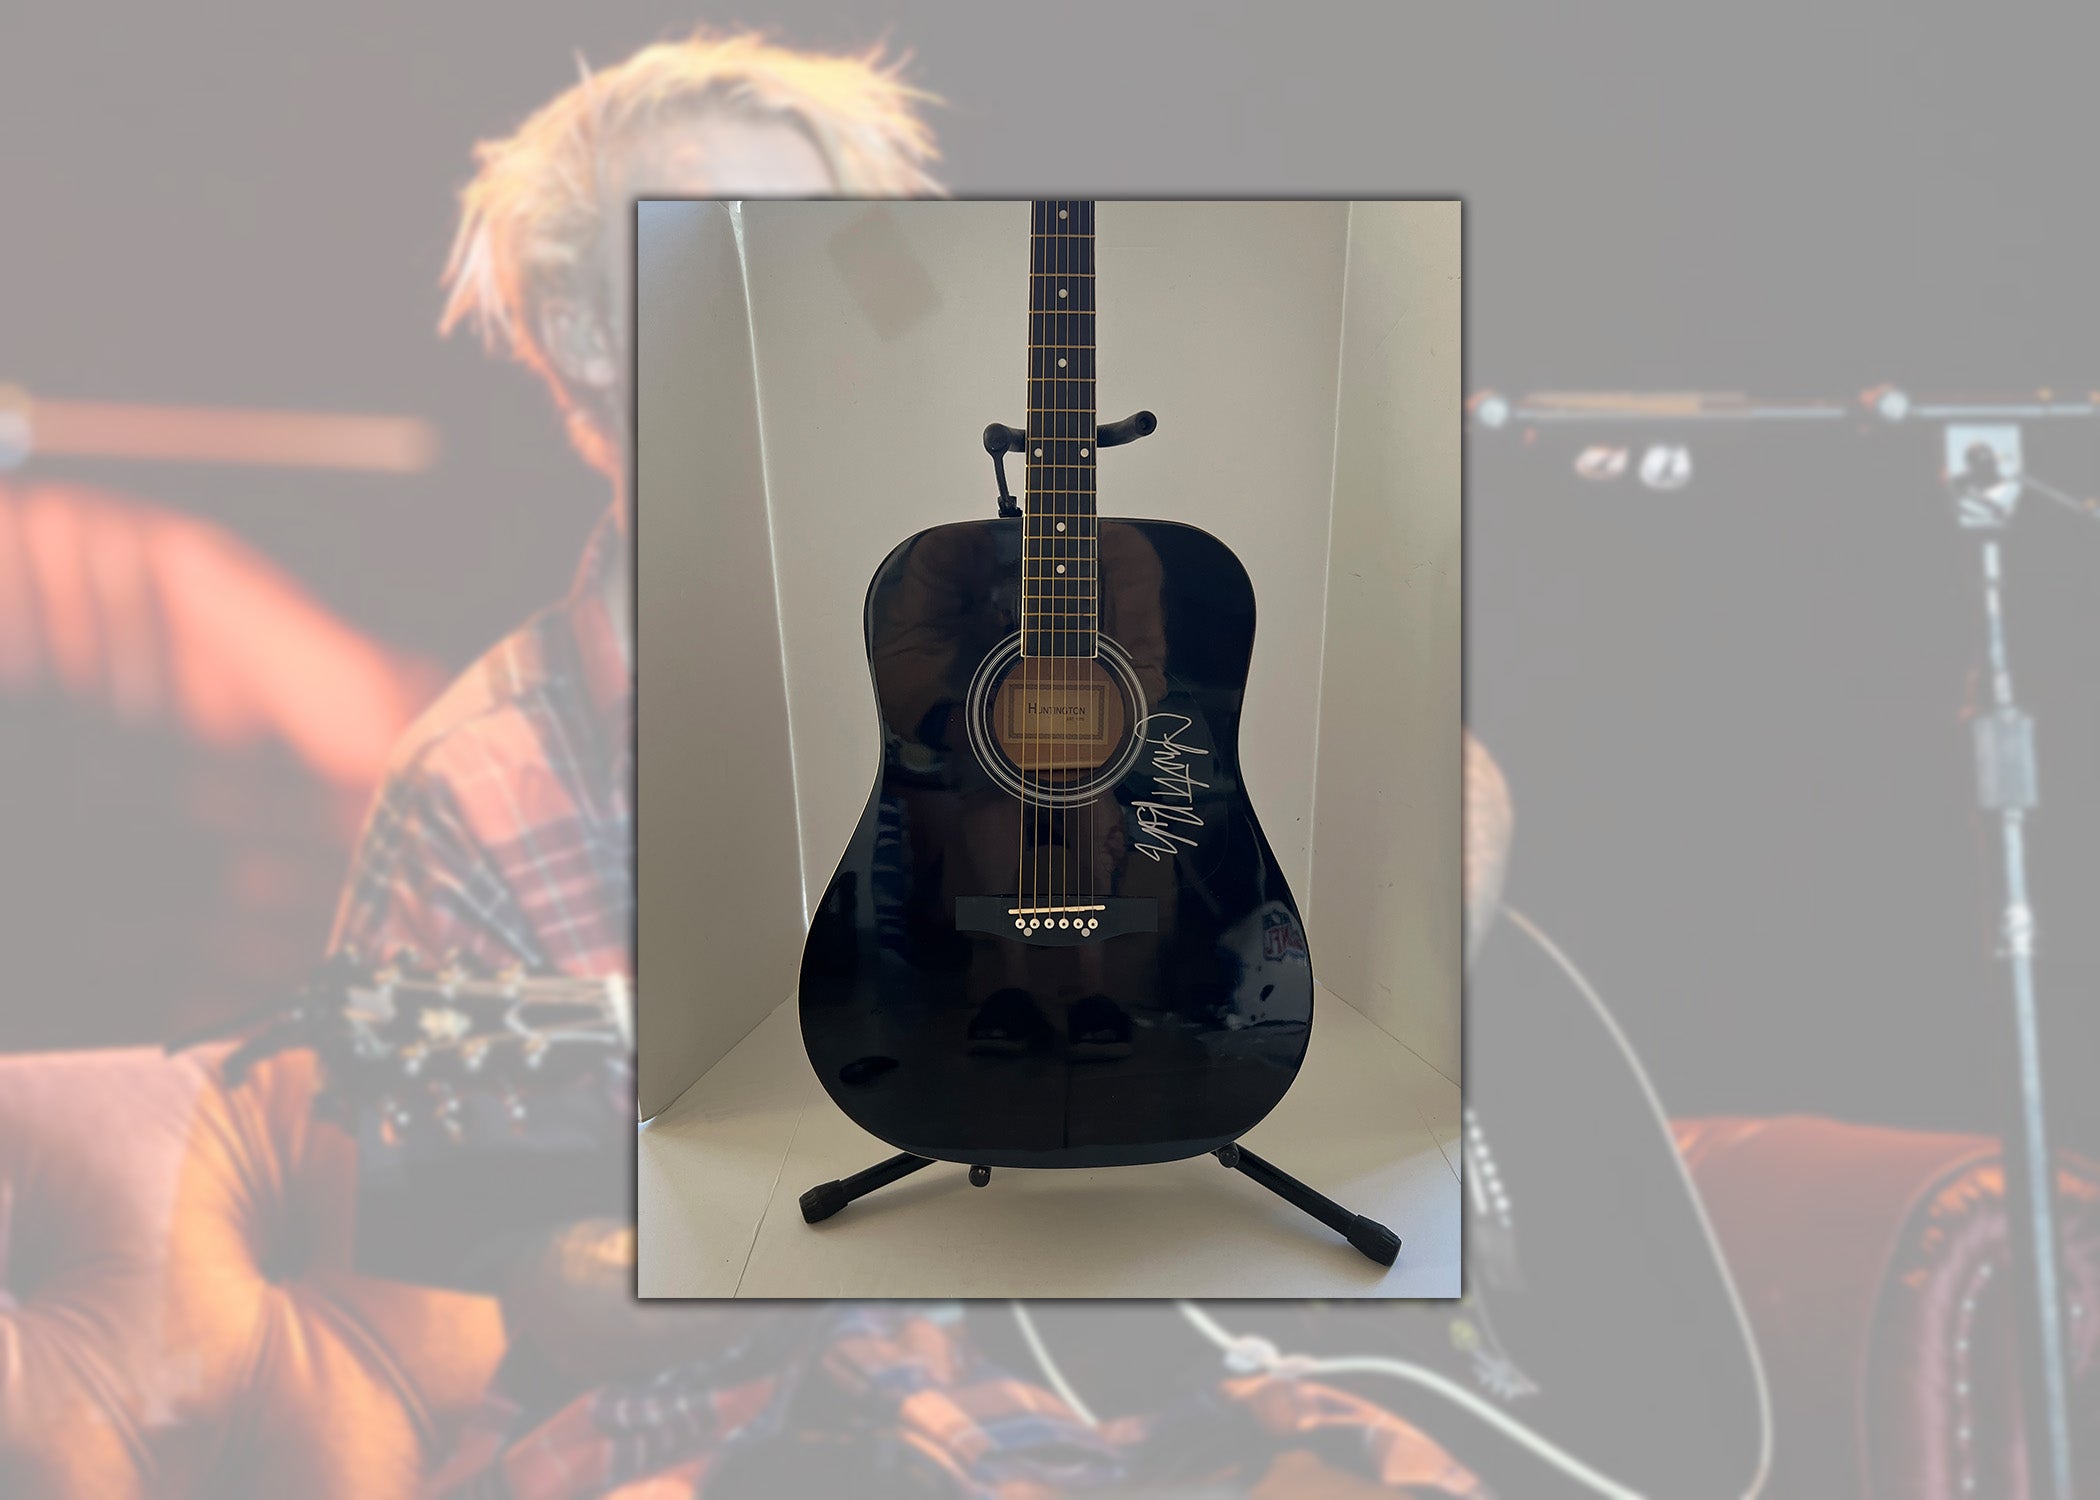 Justin Bieber full size acoustic guitar signed with proof